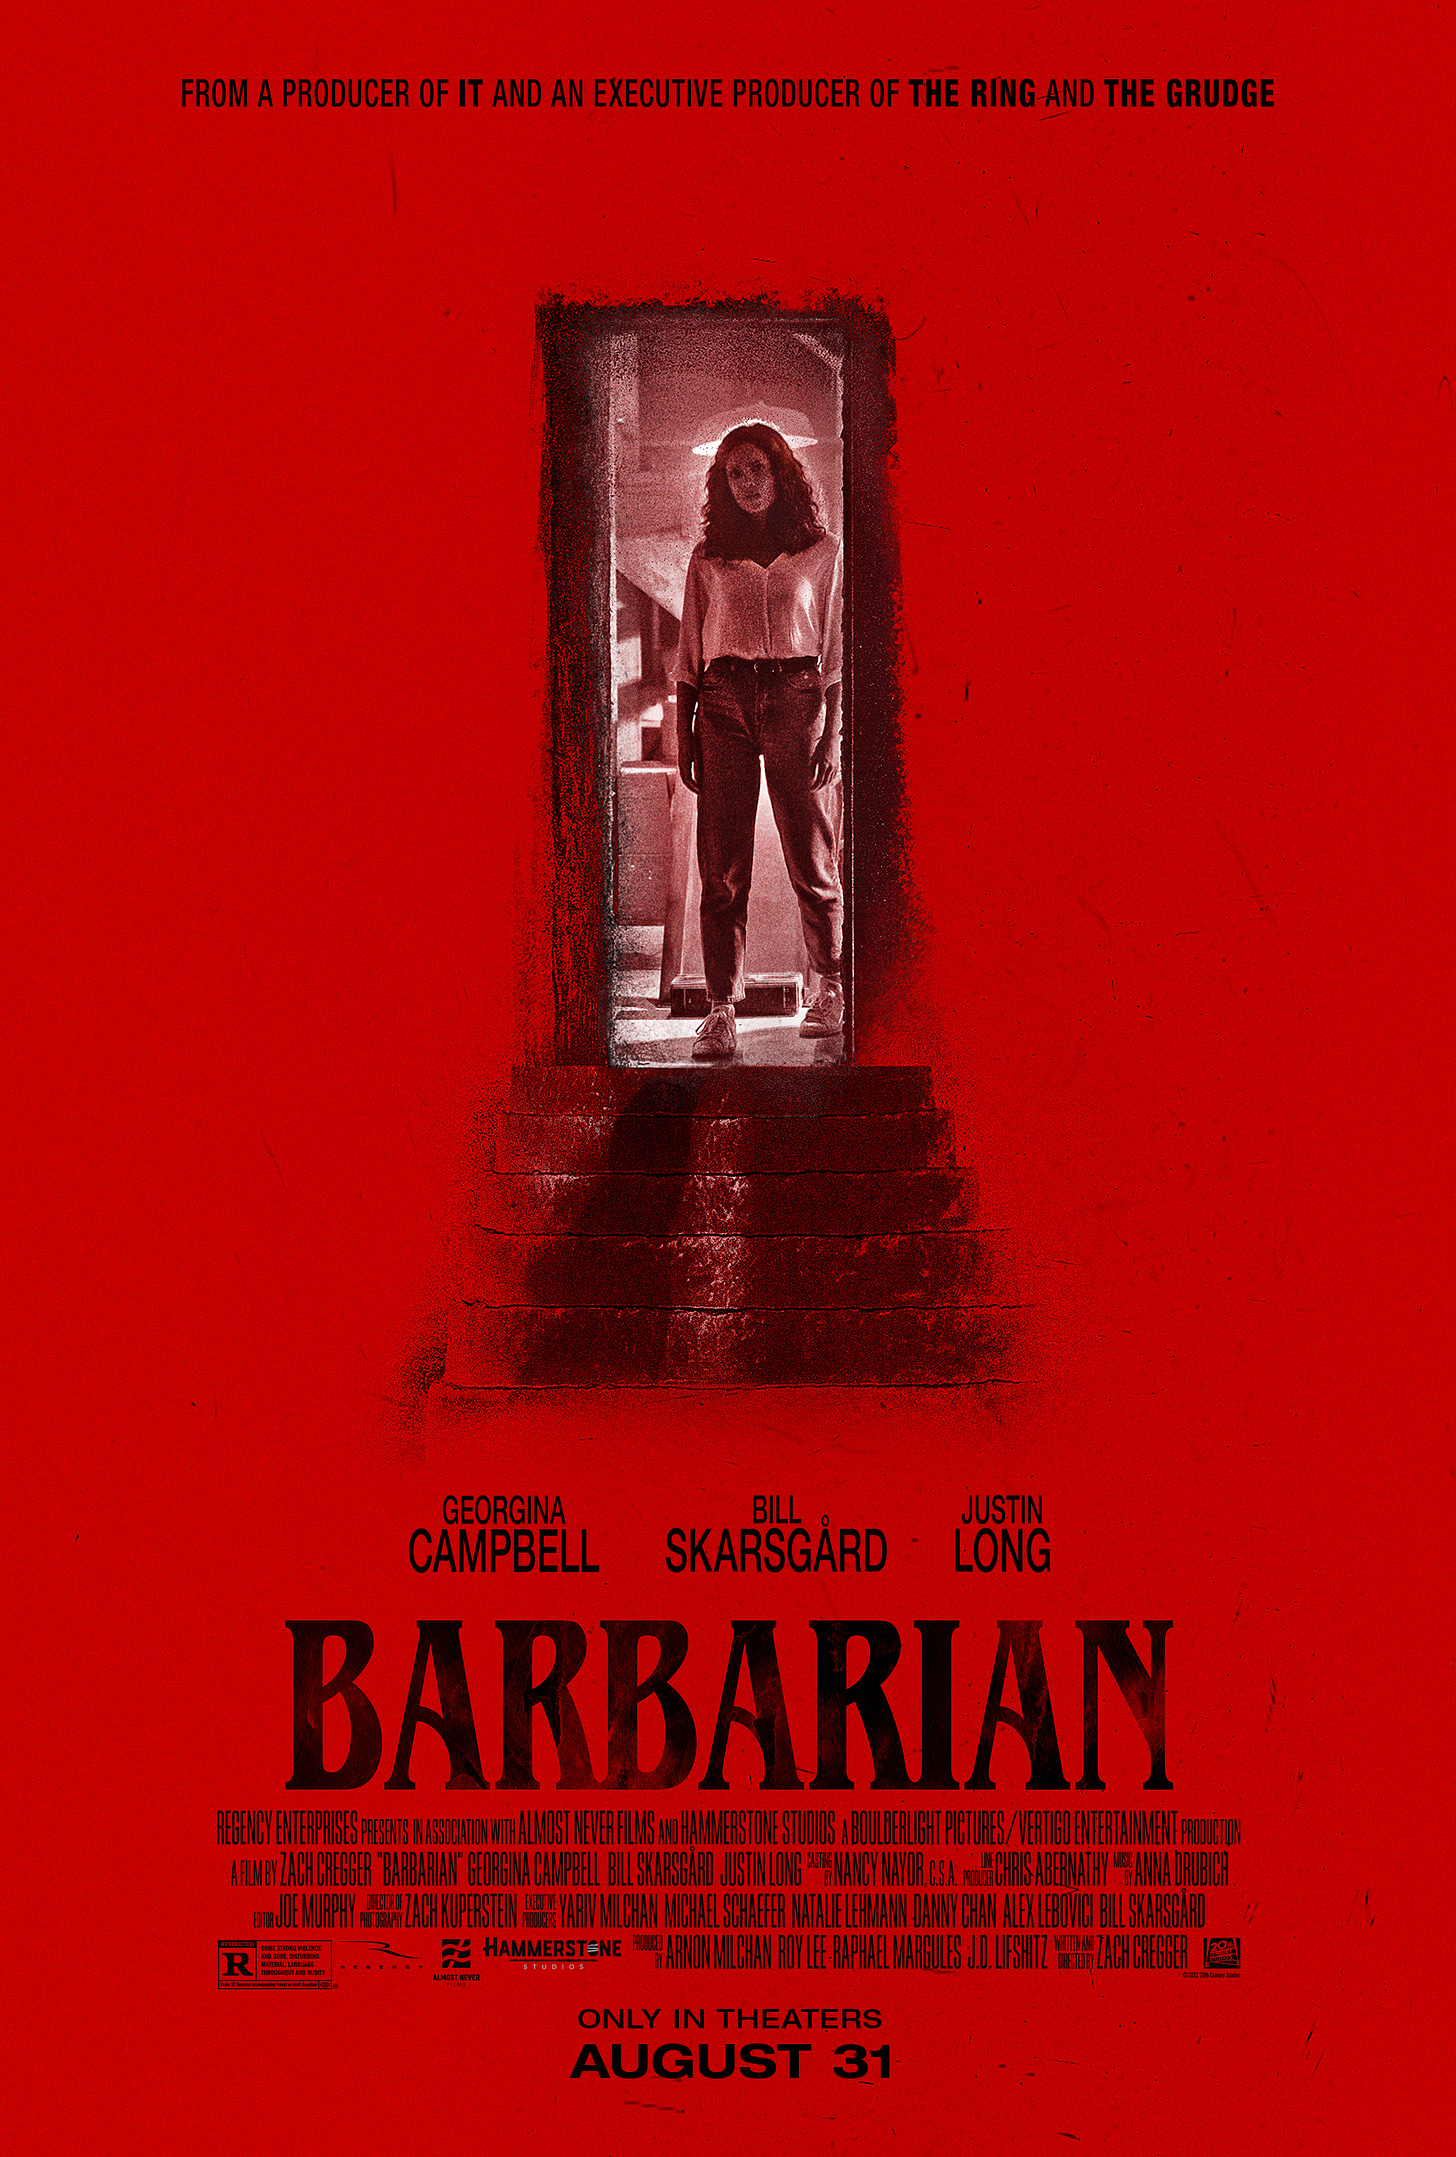 Movie poster art from IMDb for "Barbarian."